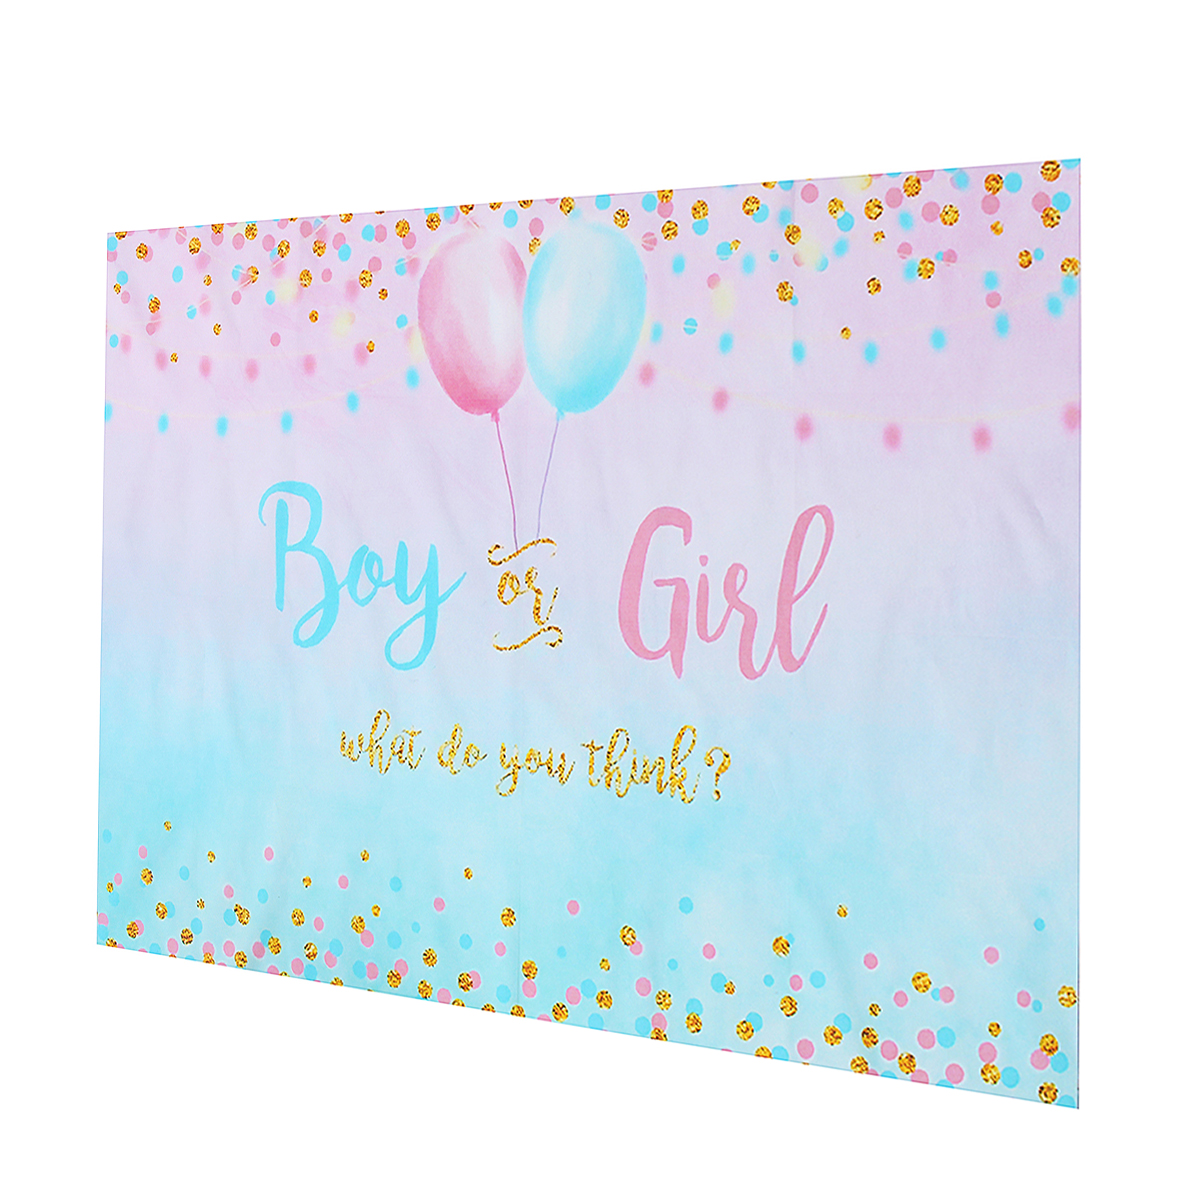 Find 3x5FT 5x7FT 6x8FT Vinyl Boy or Girl Reveal Photography Backdrop Background Studio Prop for Sale on Gipsybee.com with cryptocurrencies